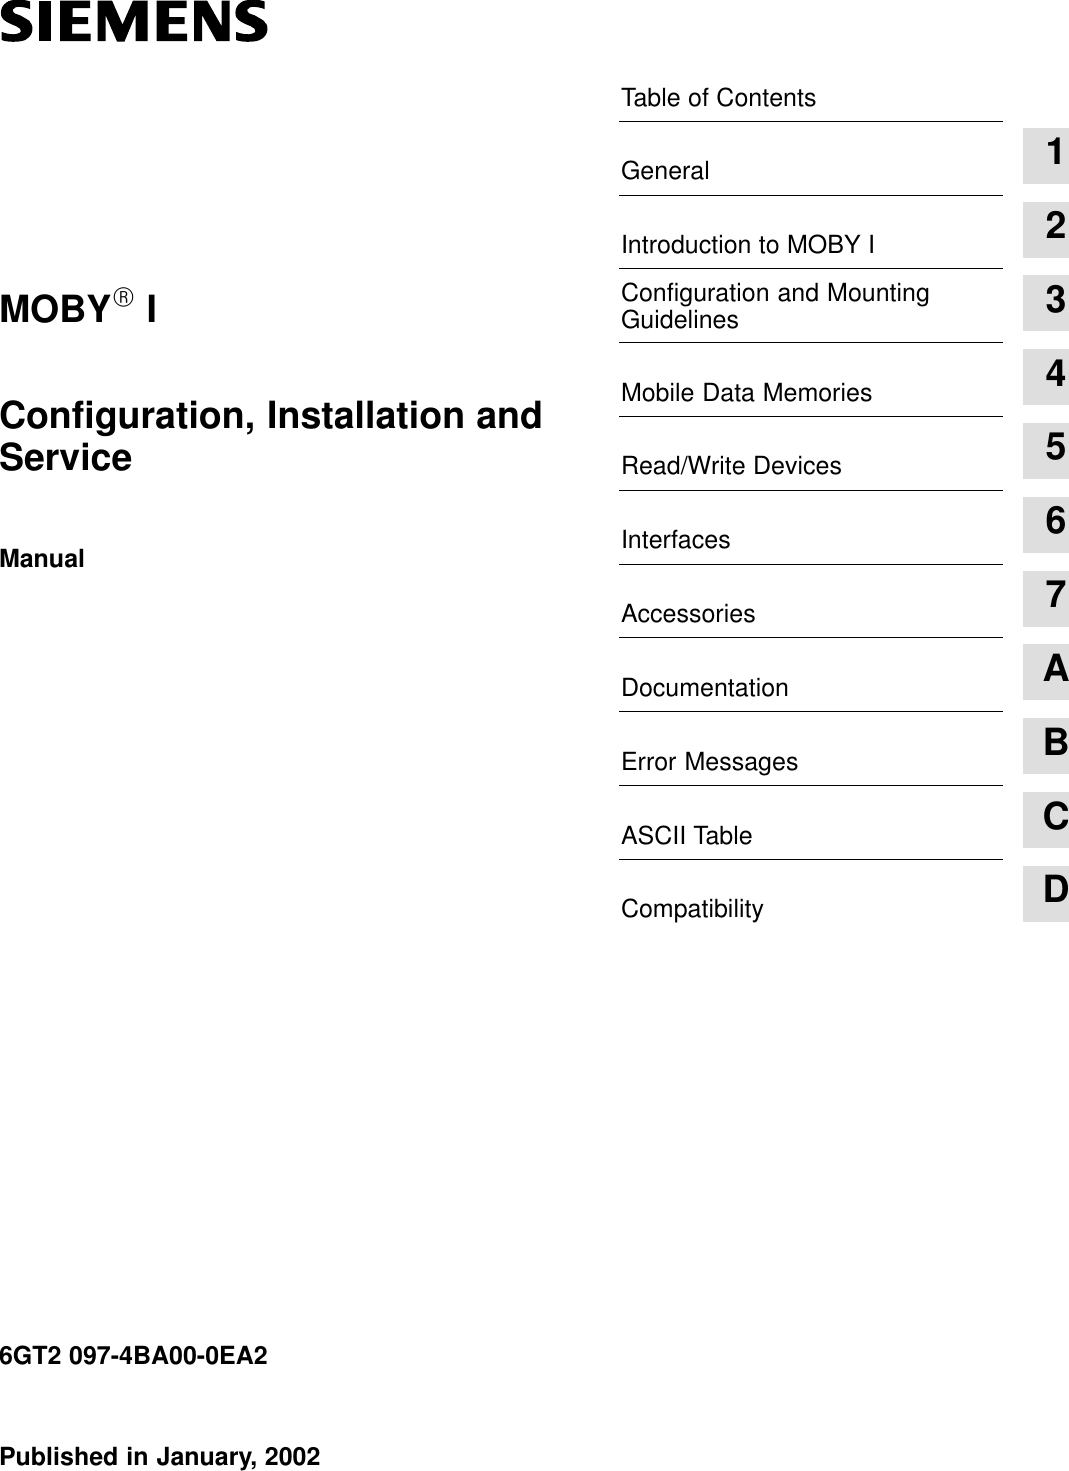 Table of ContentsGeneral 1Introduction to MOBY I 2Configuration and MountingGuidelines 3Mobile Data Memories 4Read/Write Devices 5Interfaces 6Accessories 7Documentation AError Messages BASCII Table CCompatibility DPublished in January, 20026GT2 097-4BA00-0EA2 Configuration, Installation andServiceManualMOBYR I